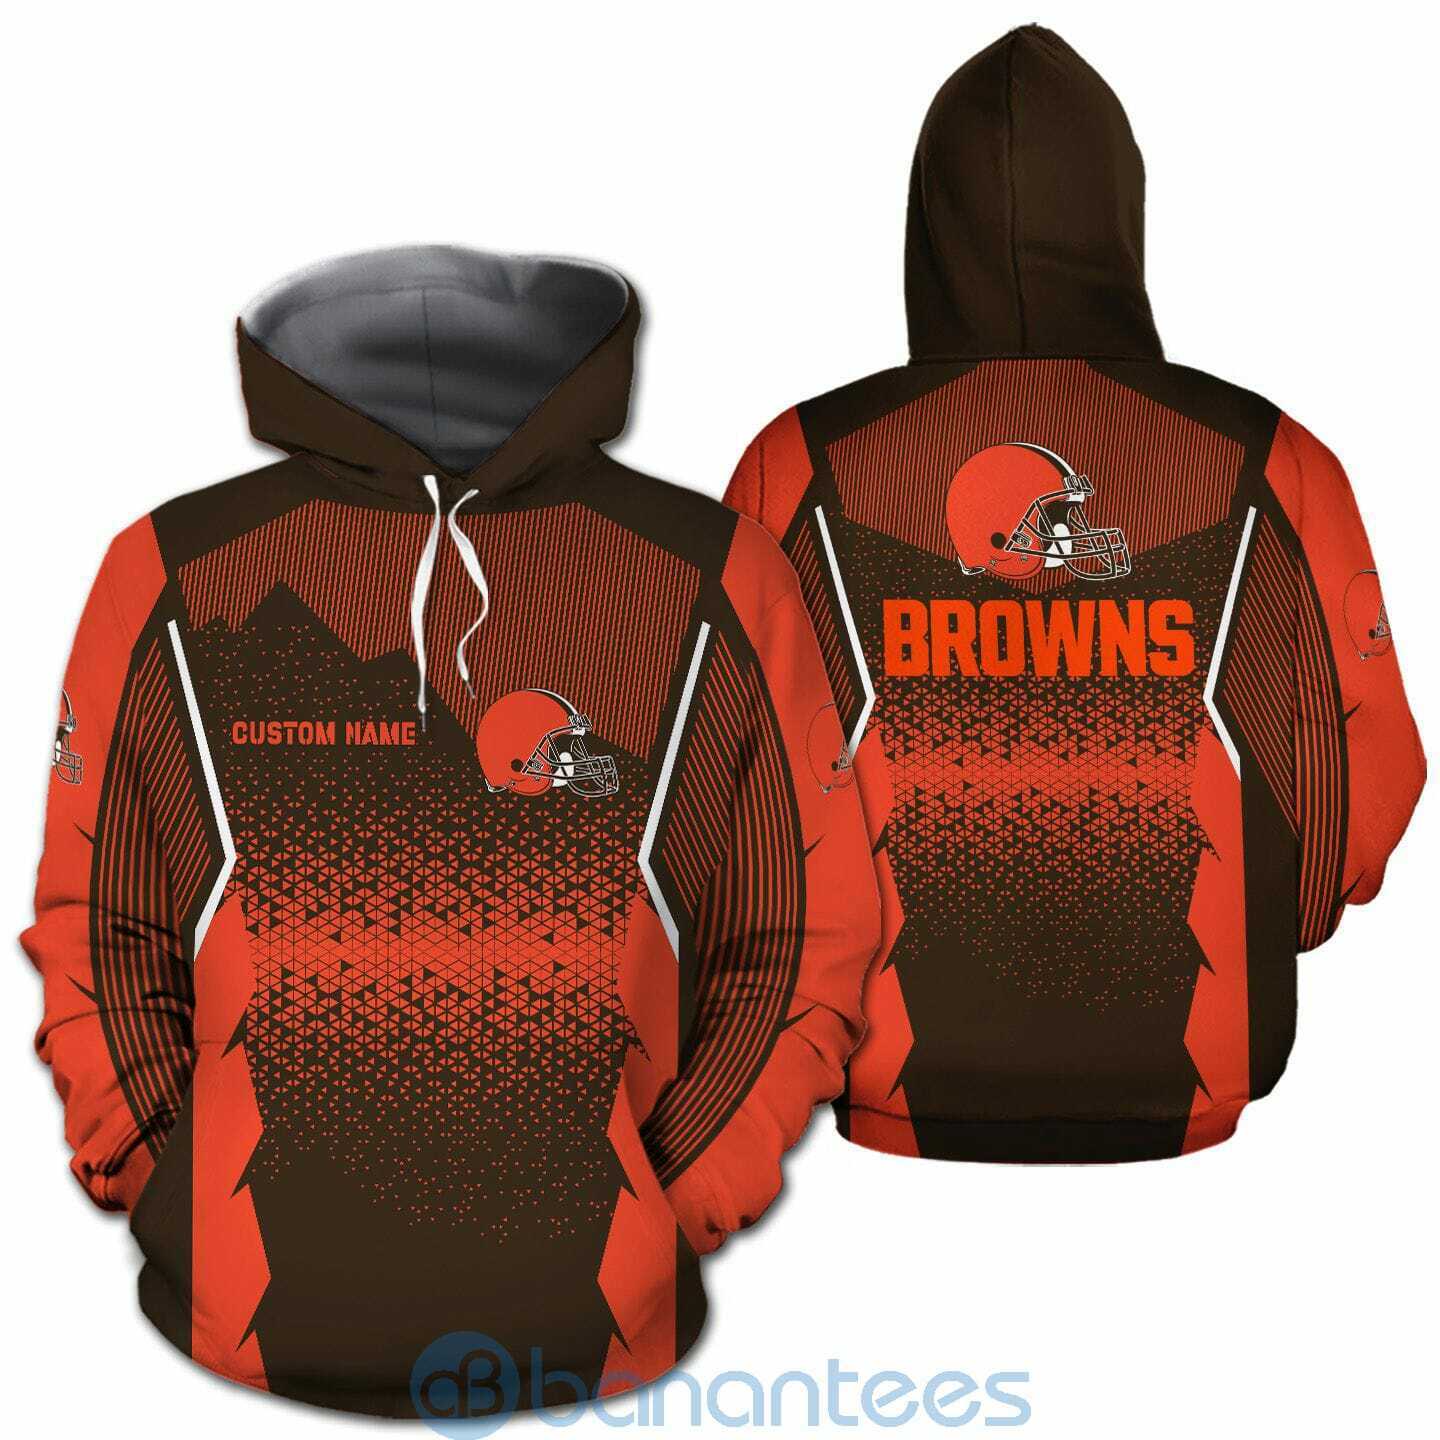 Cleveland Browns NFL Football Team Custom Name 3D All Over Printed Shirt For Fans